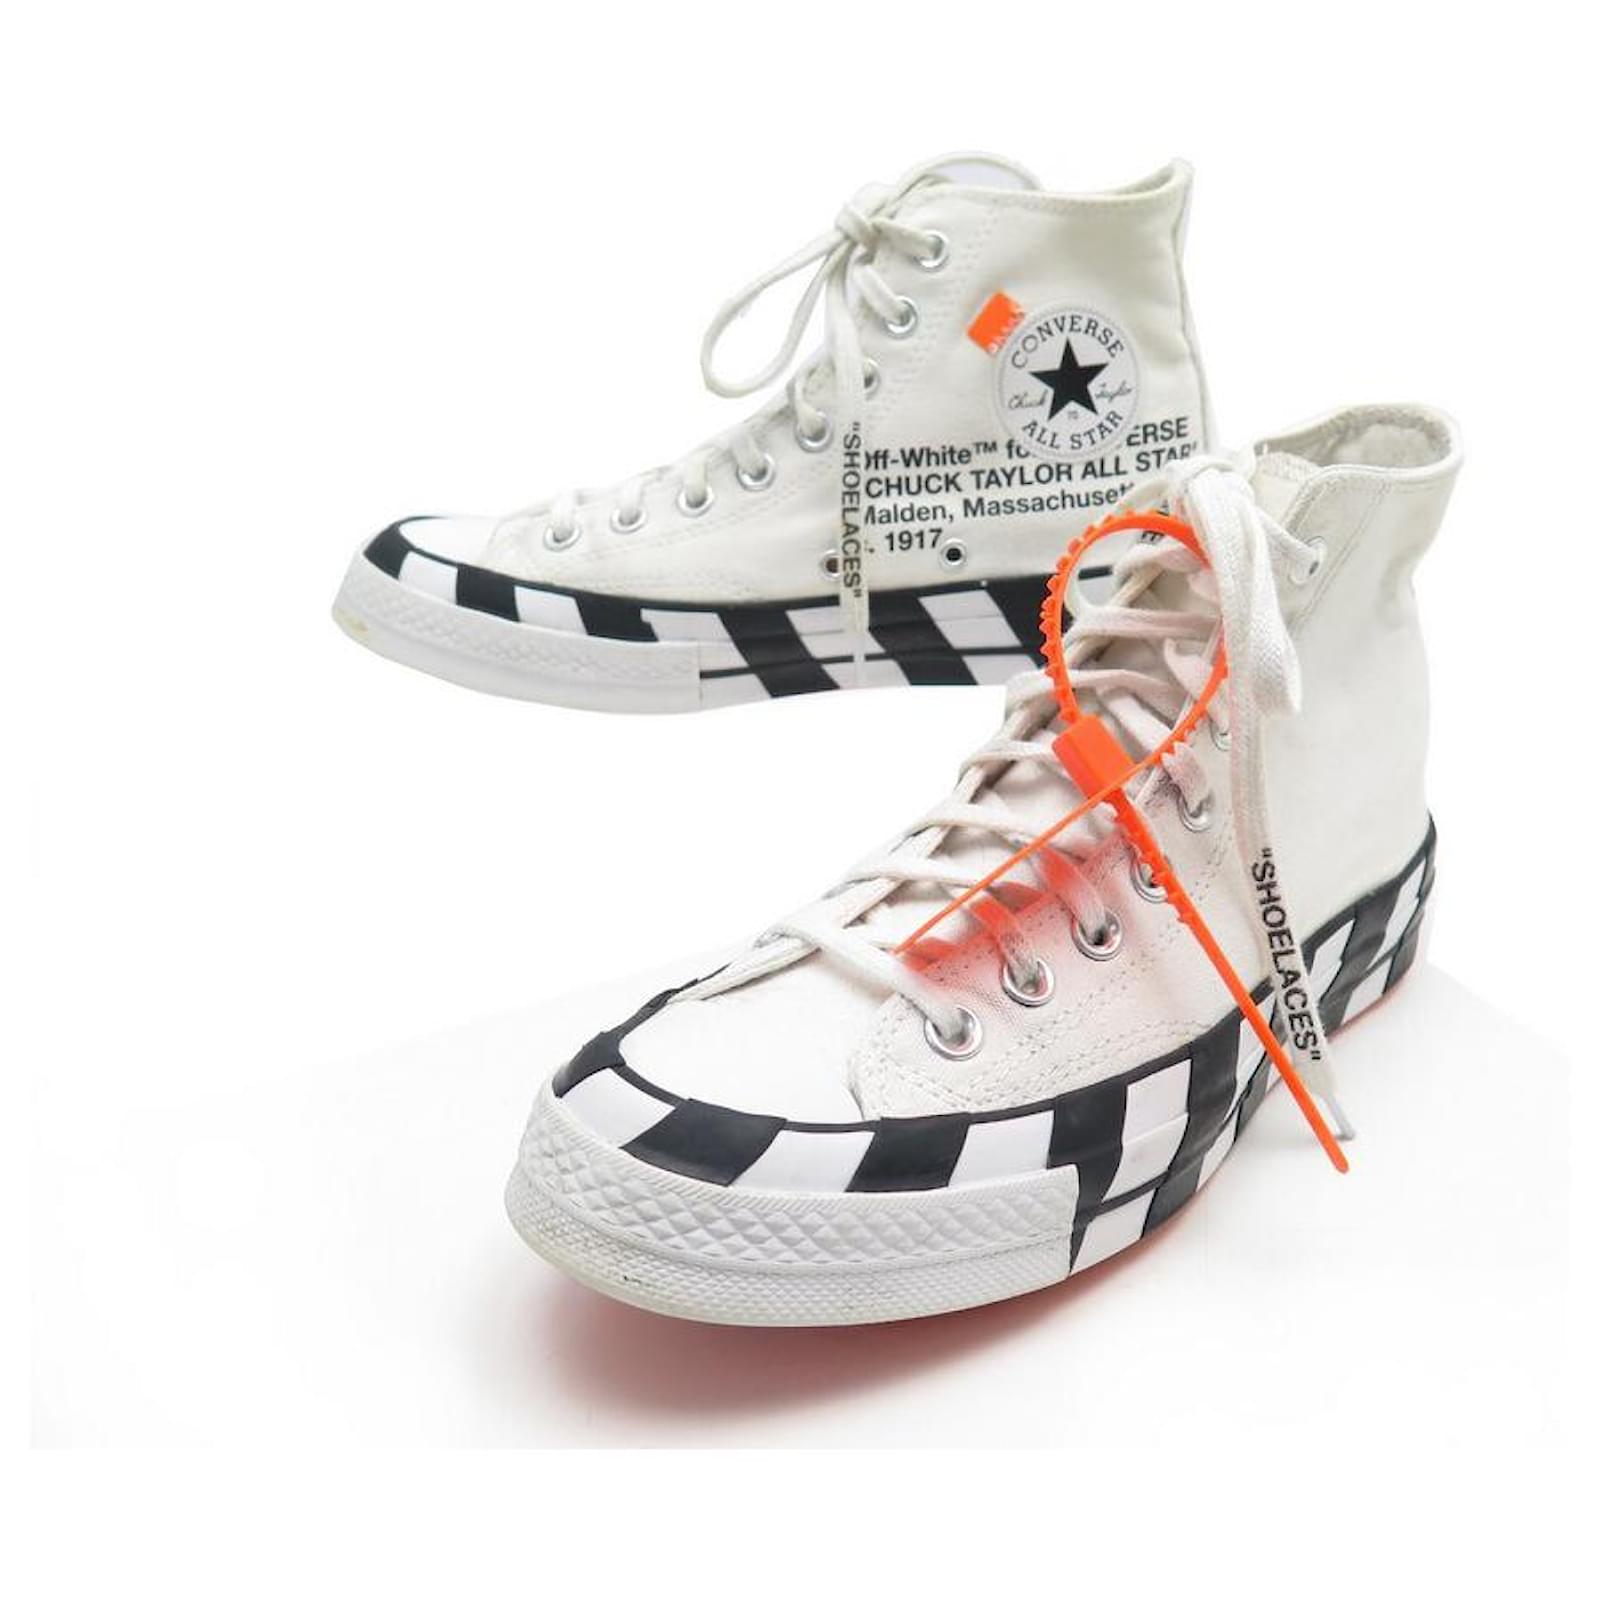 OFF-WHITE SHOES X CONVERSE SNEAKER 39.5 CHUCK TAYLOR ALL STAR 70 STRIPE